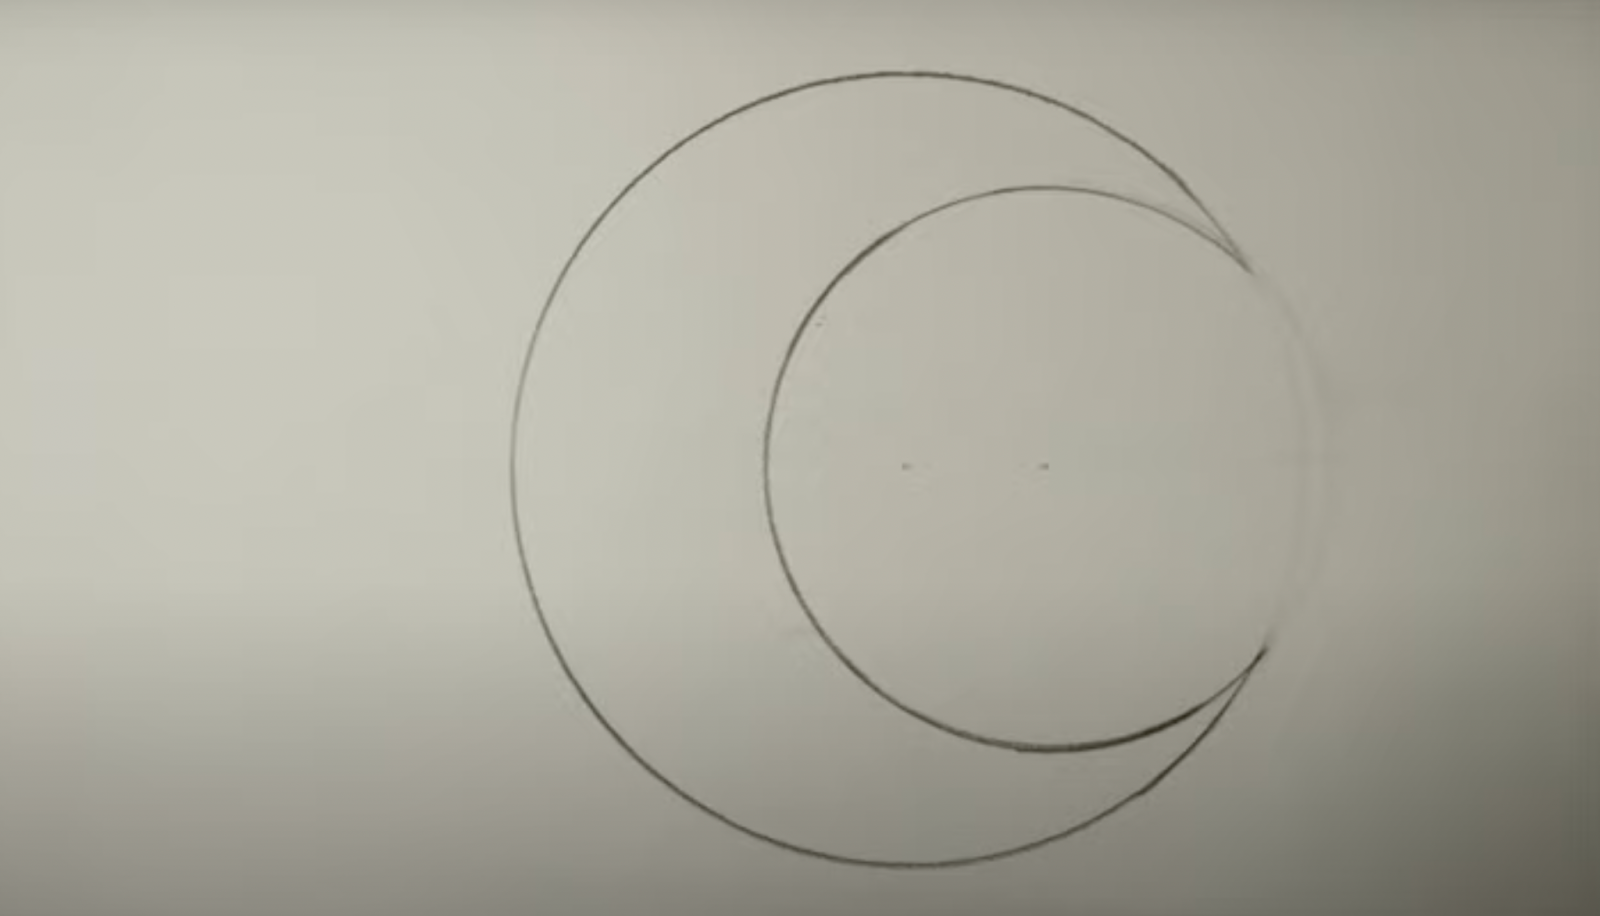 How to Draw a Crescent Moon 15 Great Tutorials for All Types of Artists